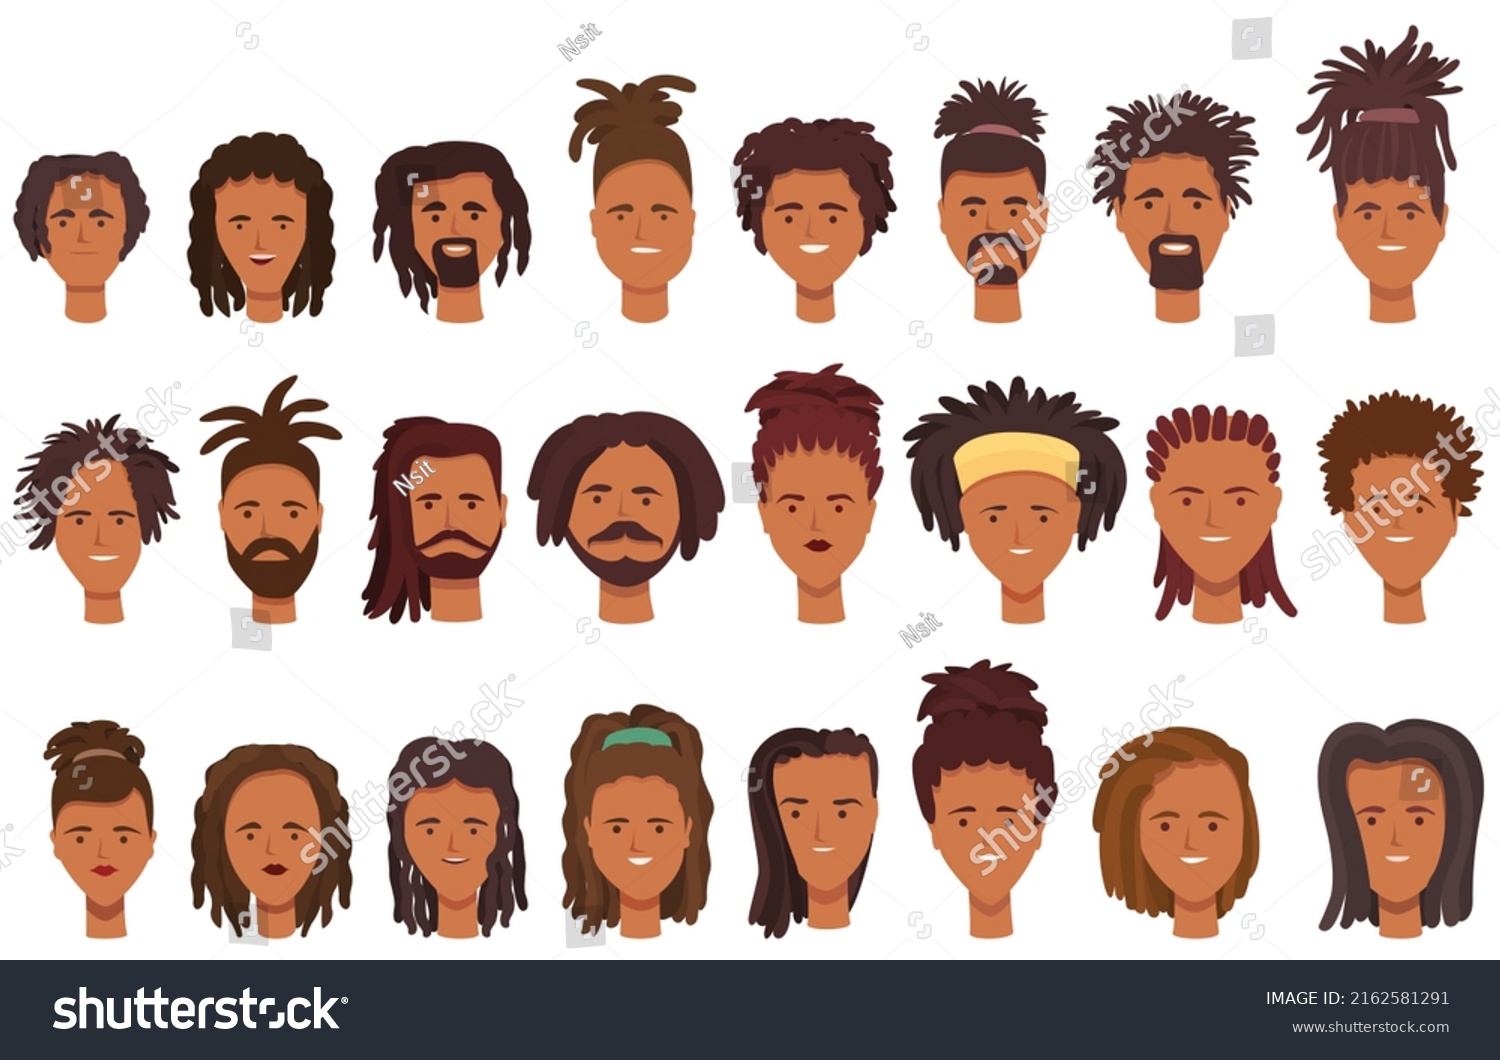 SVG of Dreadlocks icons set cartoon vector. African fashion. Adult character svg